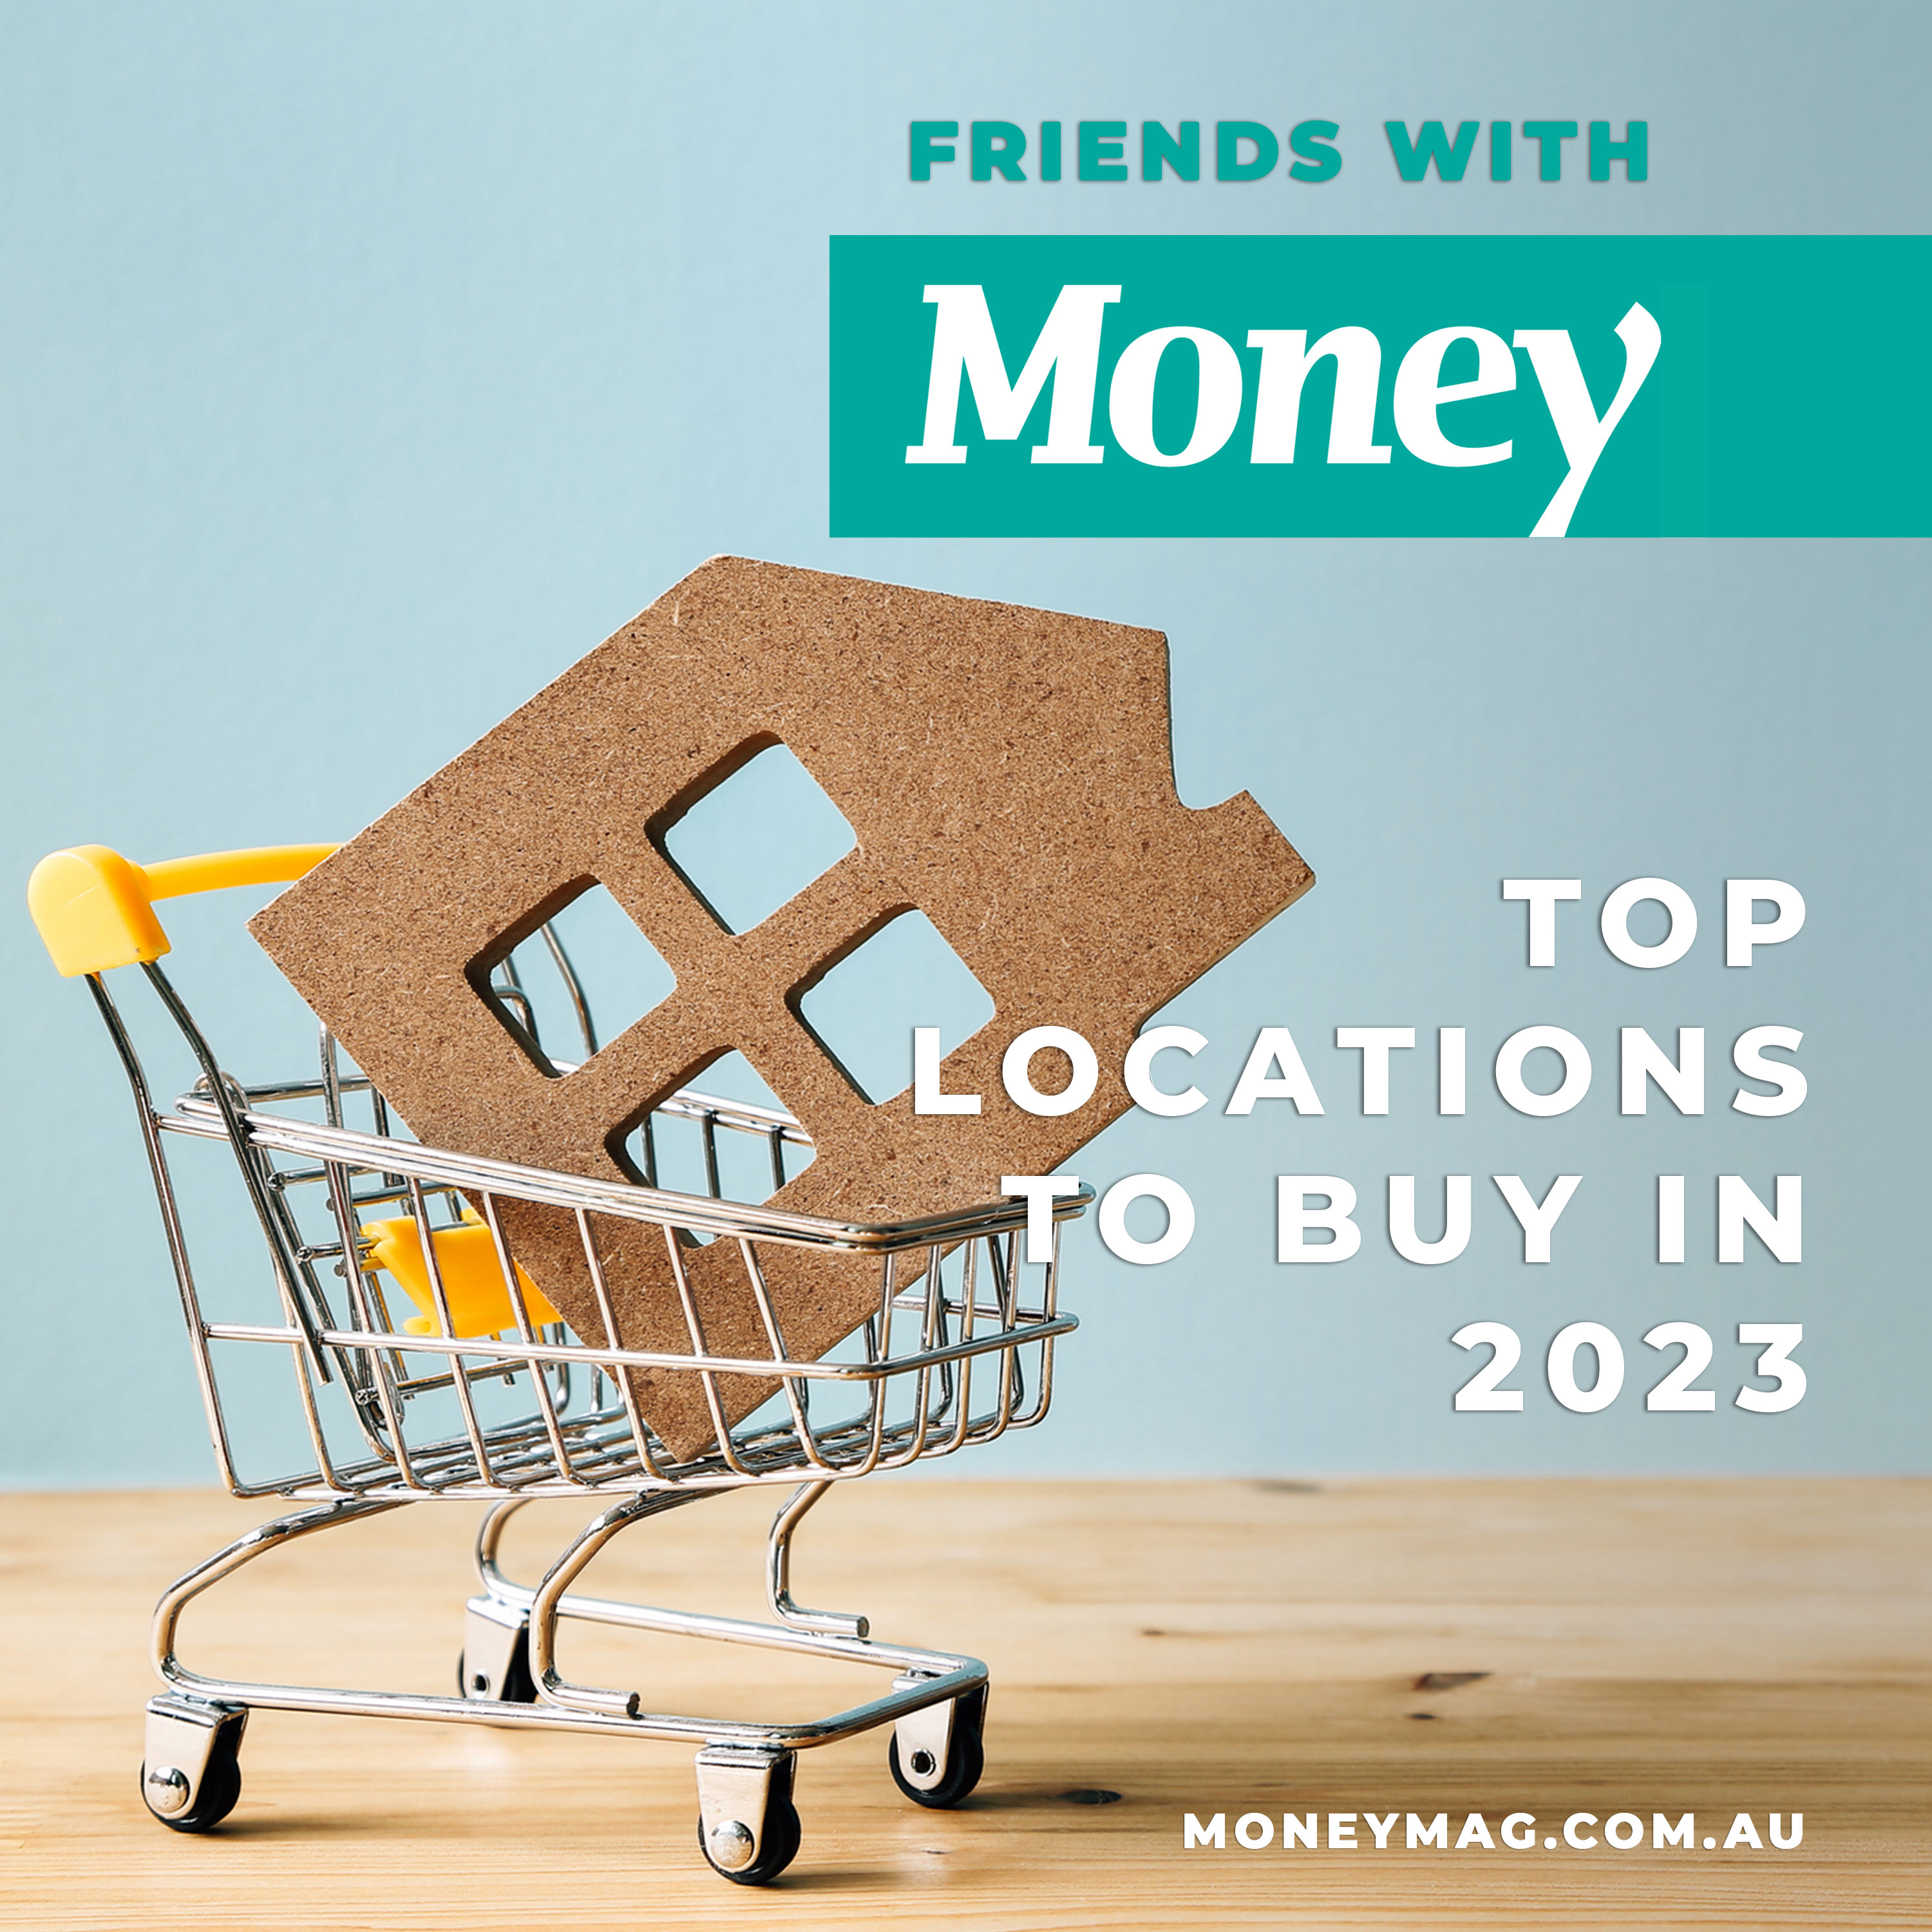 Top locations to buy in 2023